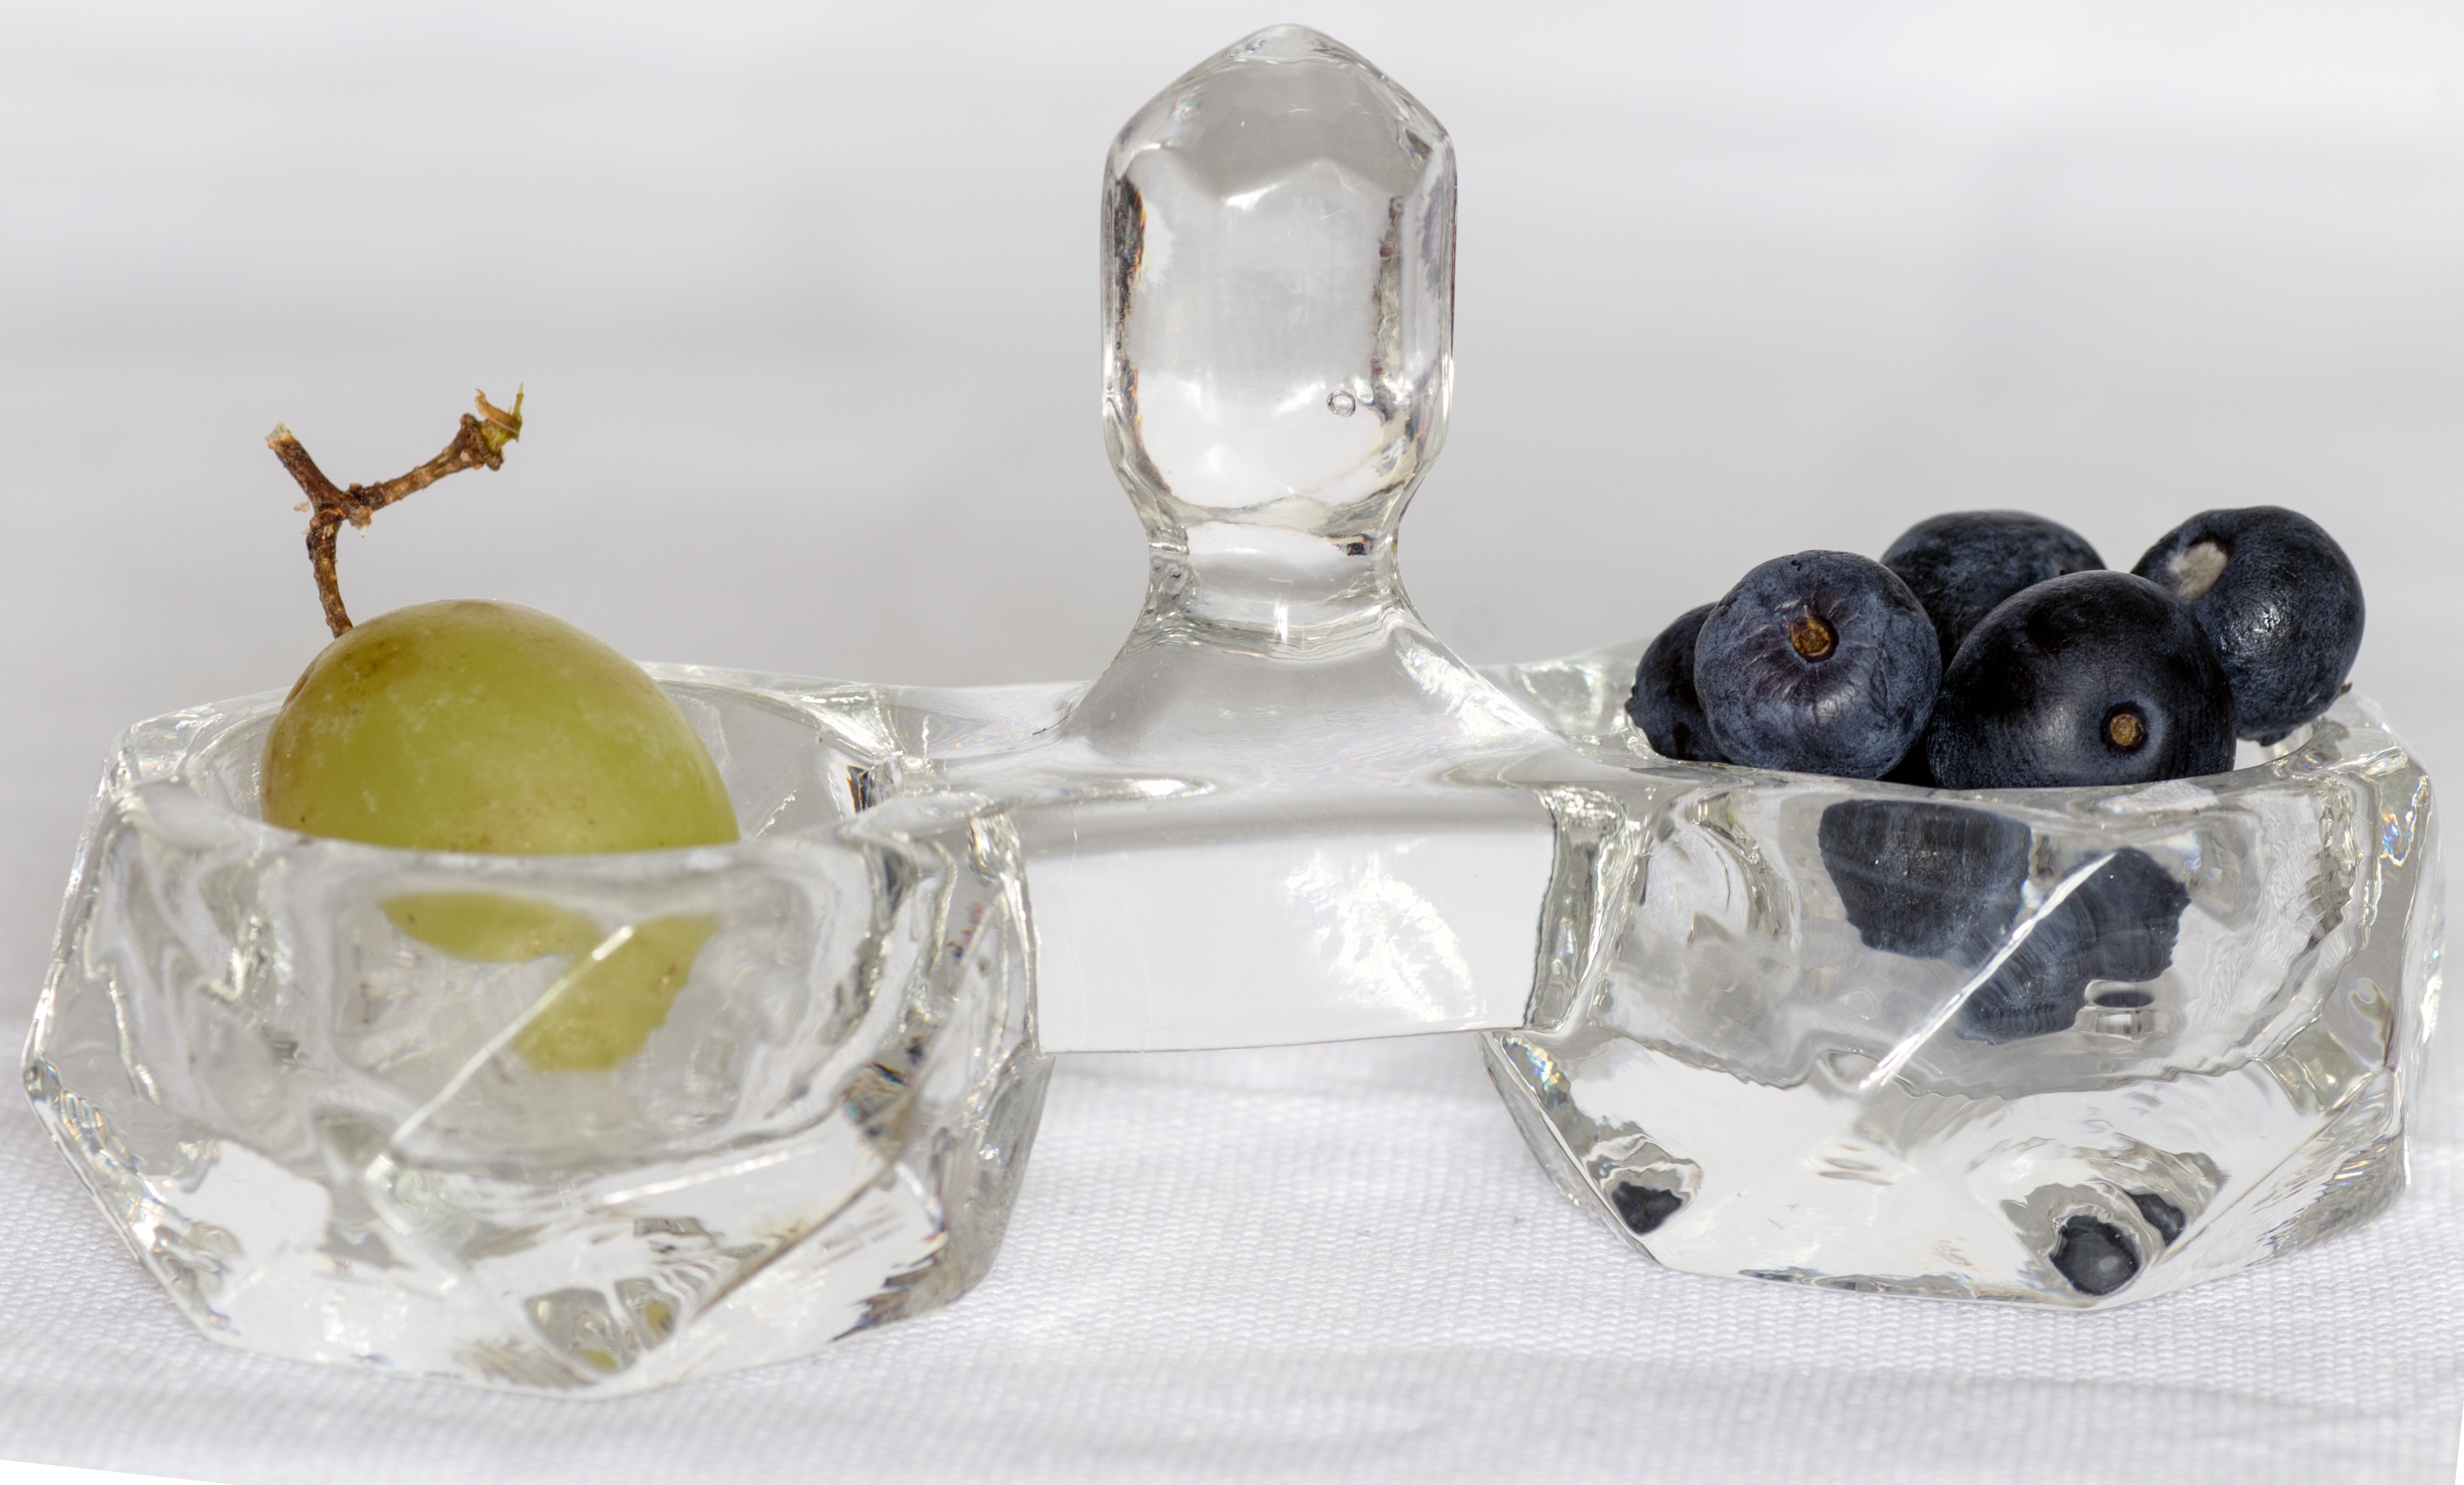 2 berry in clear glass bowl